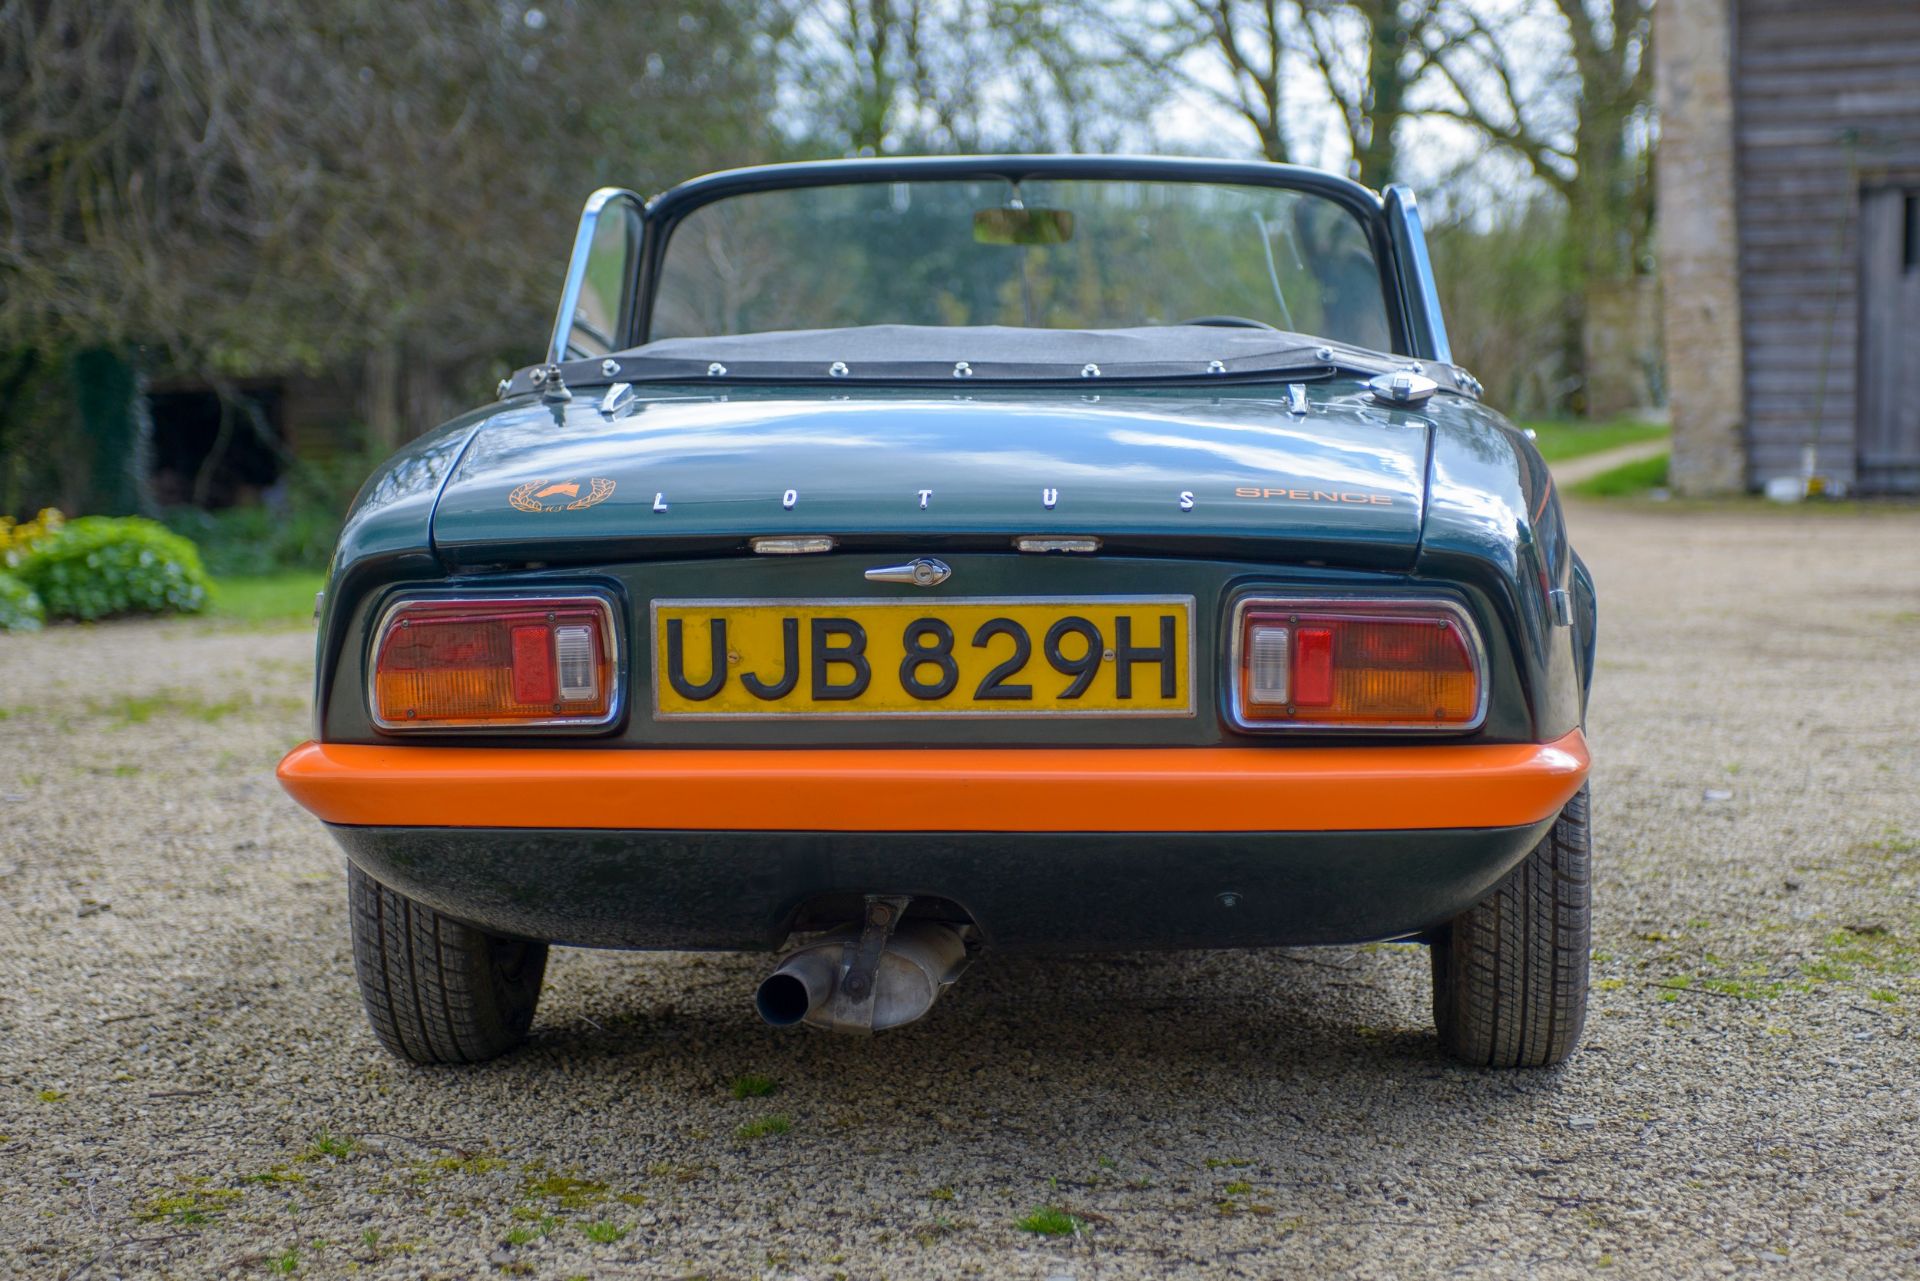 1969 LOTUS ELAN SERIES 4 BRM DROPHEAD COUPE Chassis Number: 45/9498 Registration Number: UJB 829H - Image 7 of 33